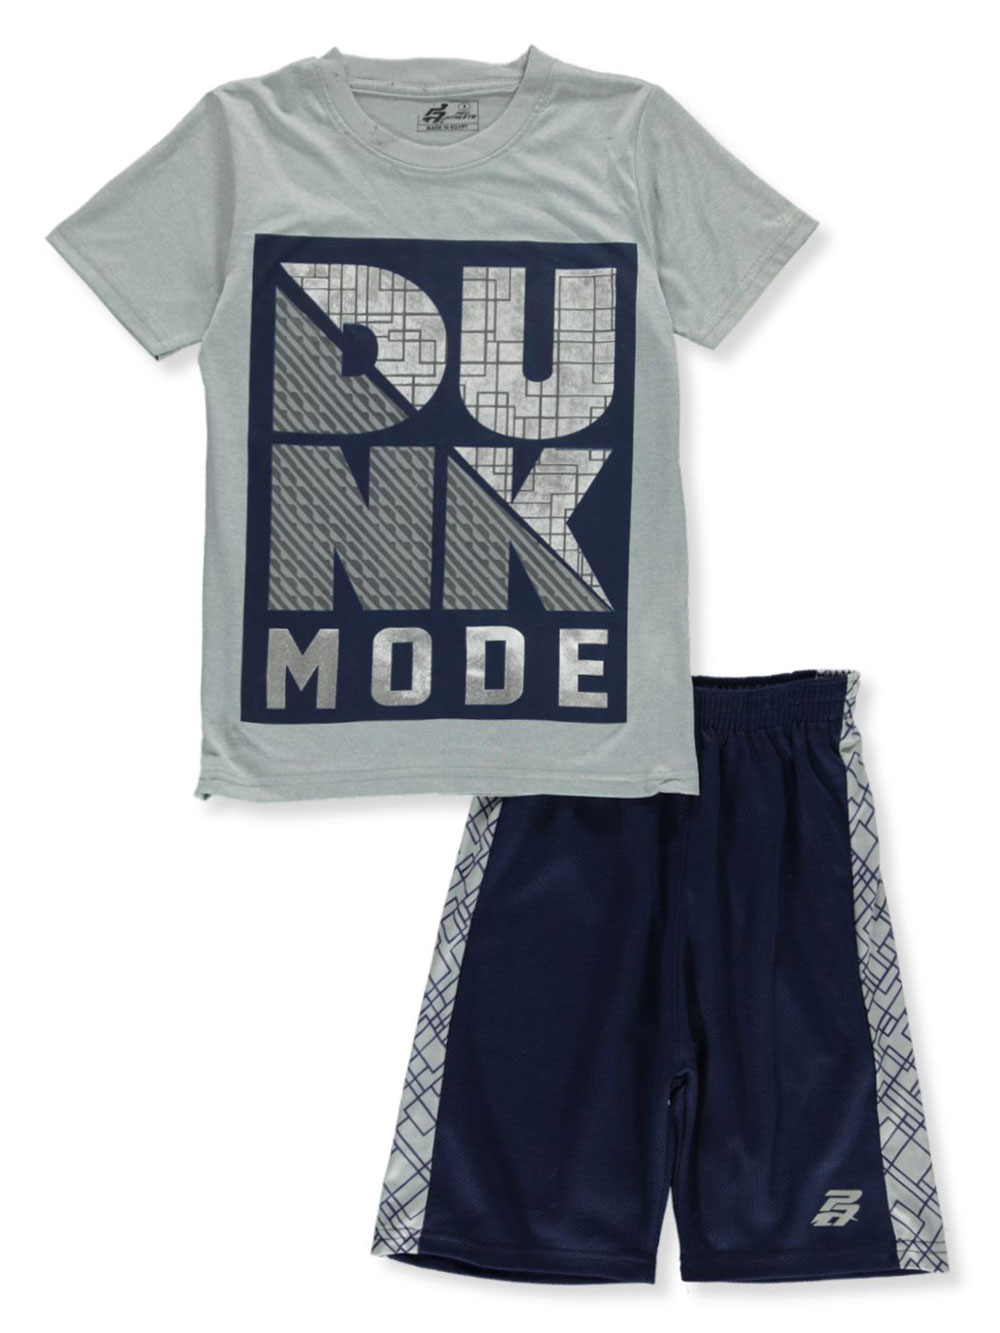 Size 14-16 Sets for Boys